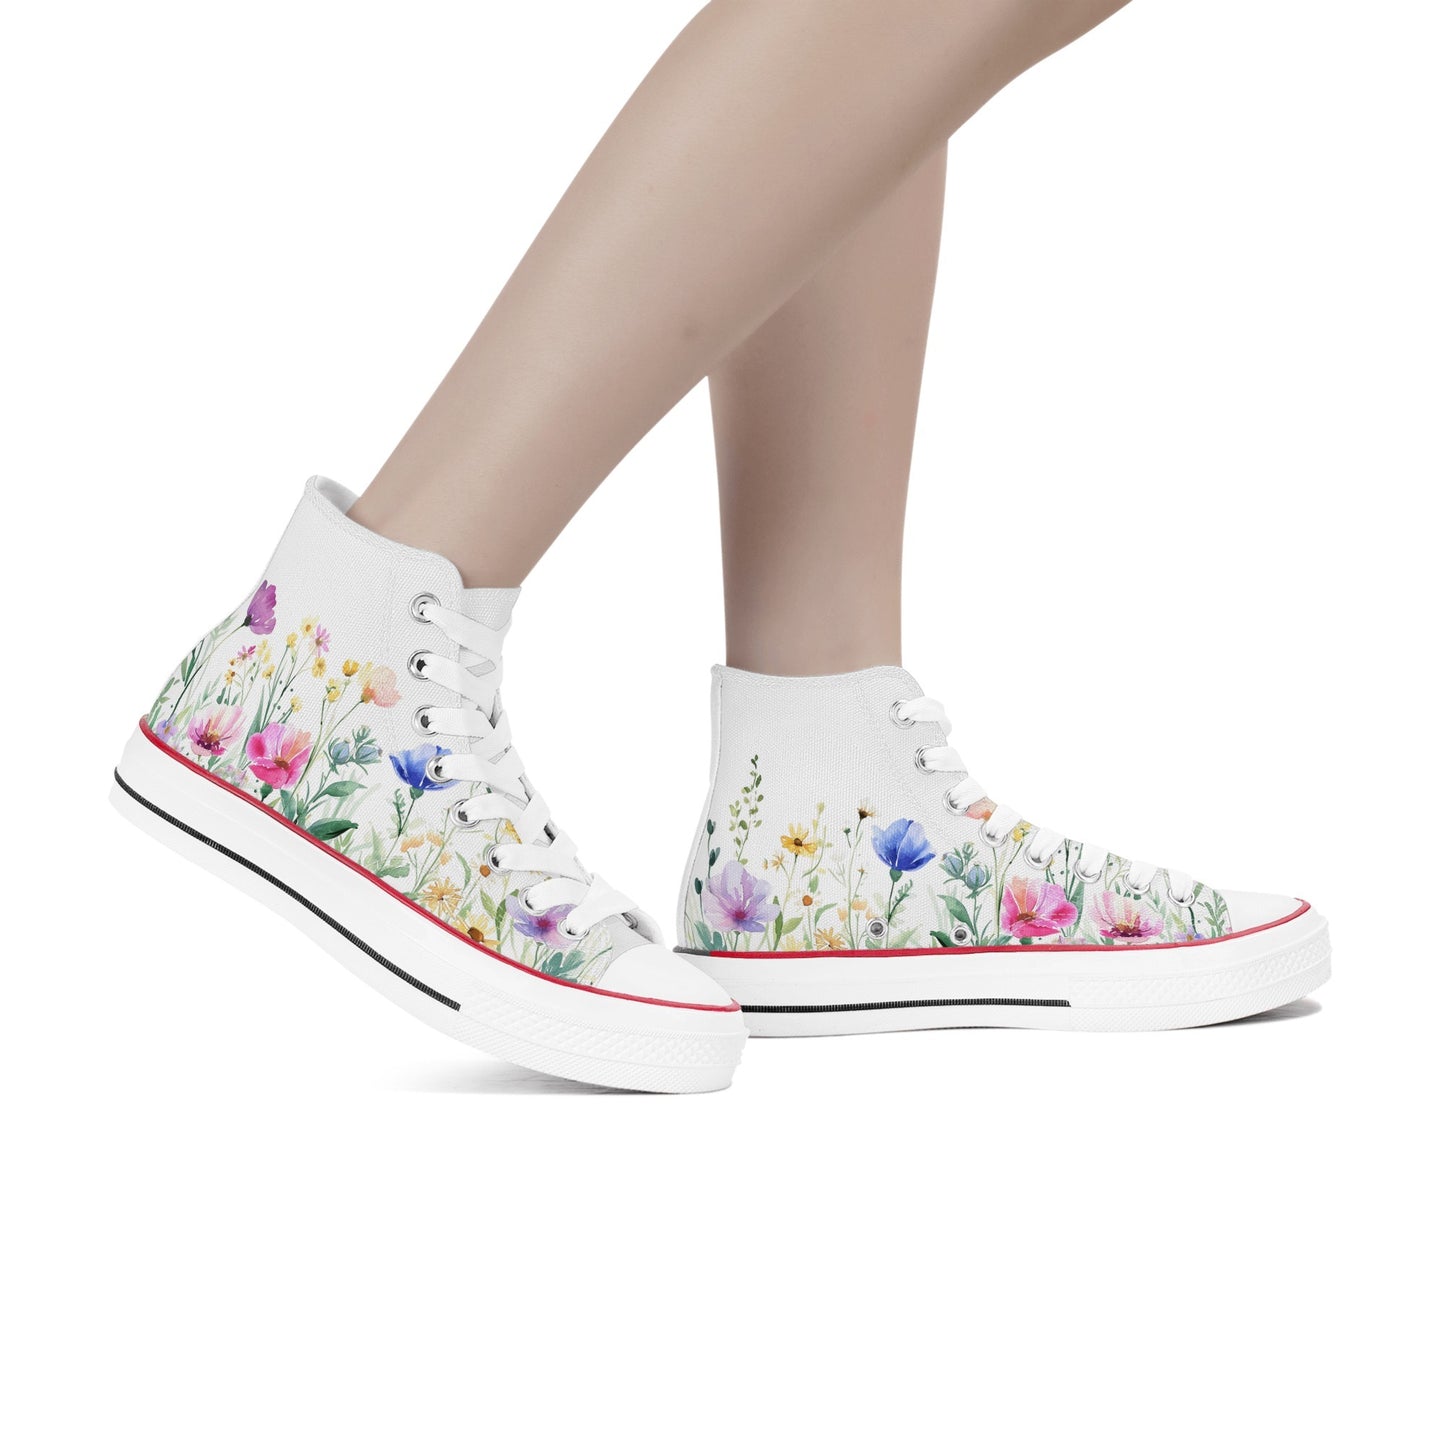 Spring Bloom High Top Canvas Shoes-Men and Women Sizes